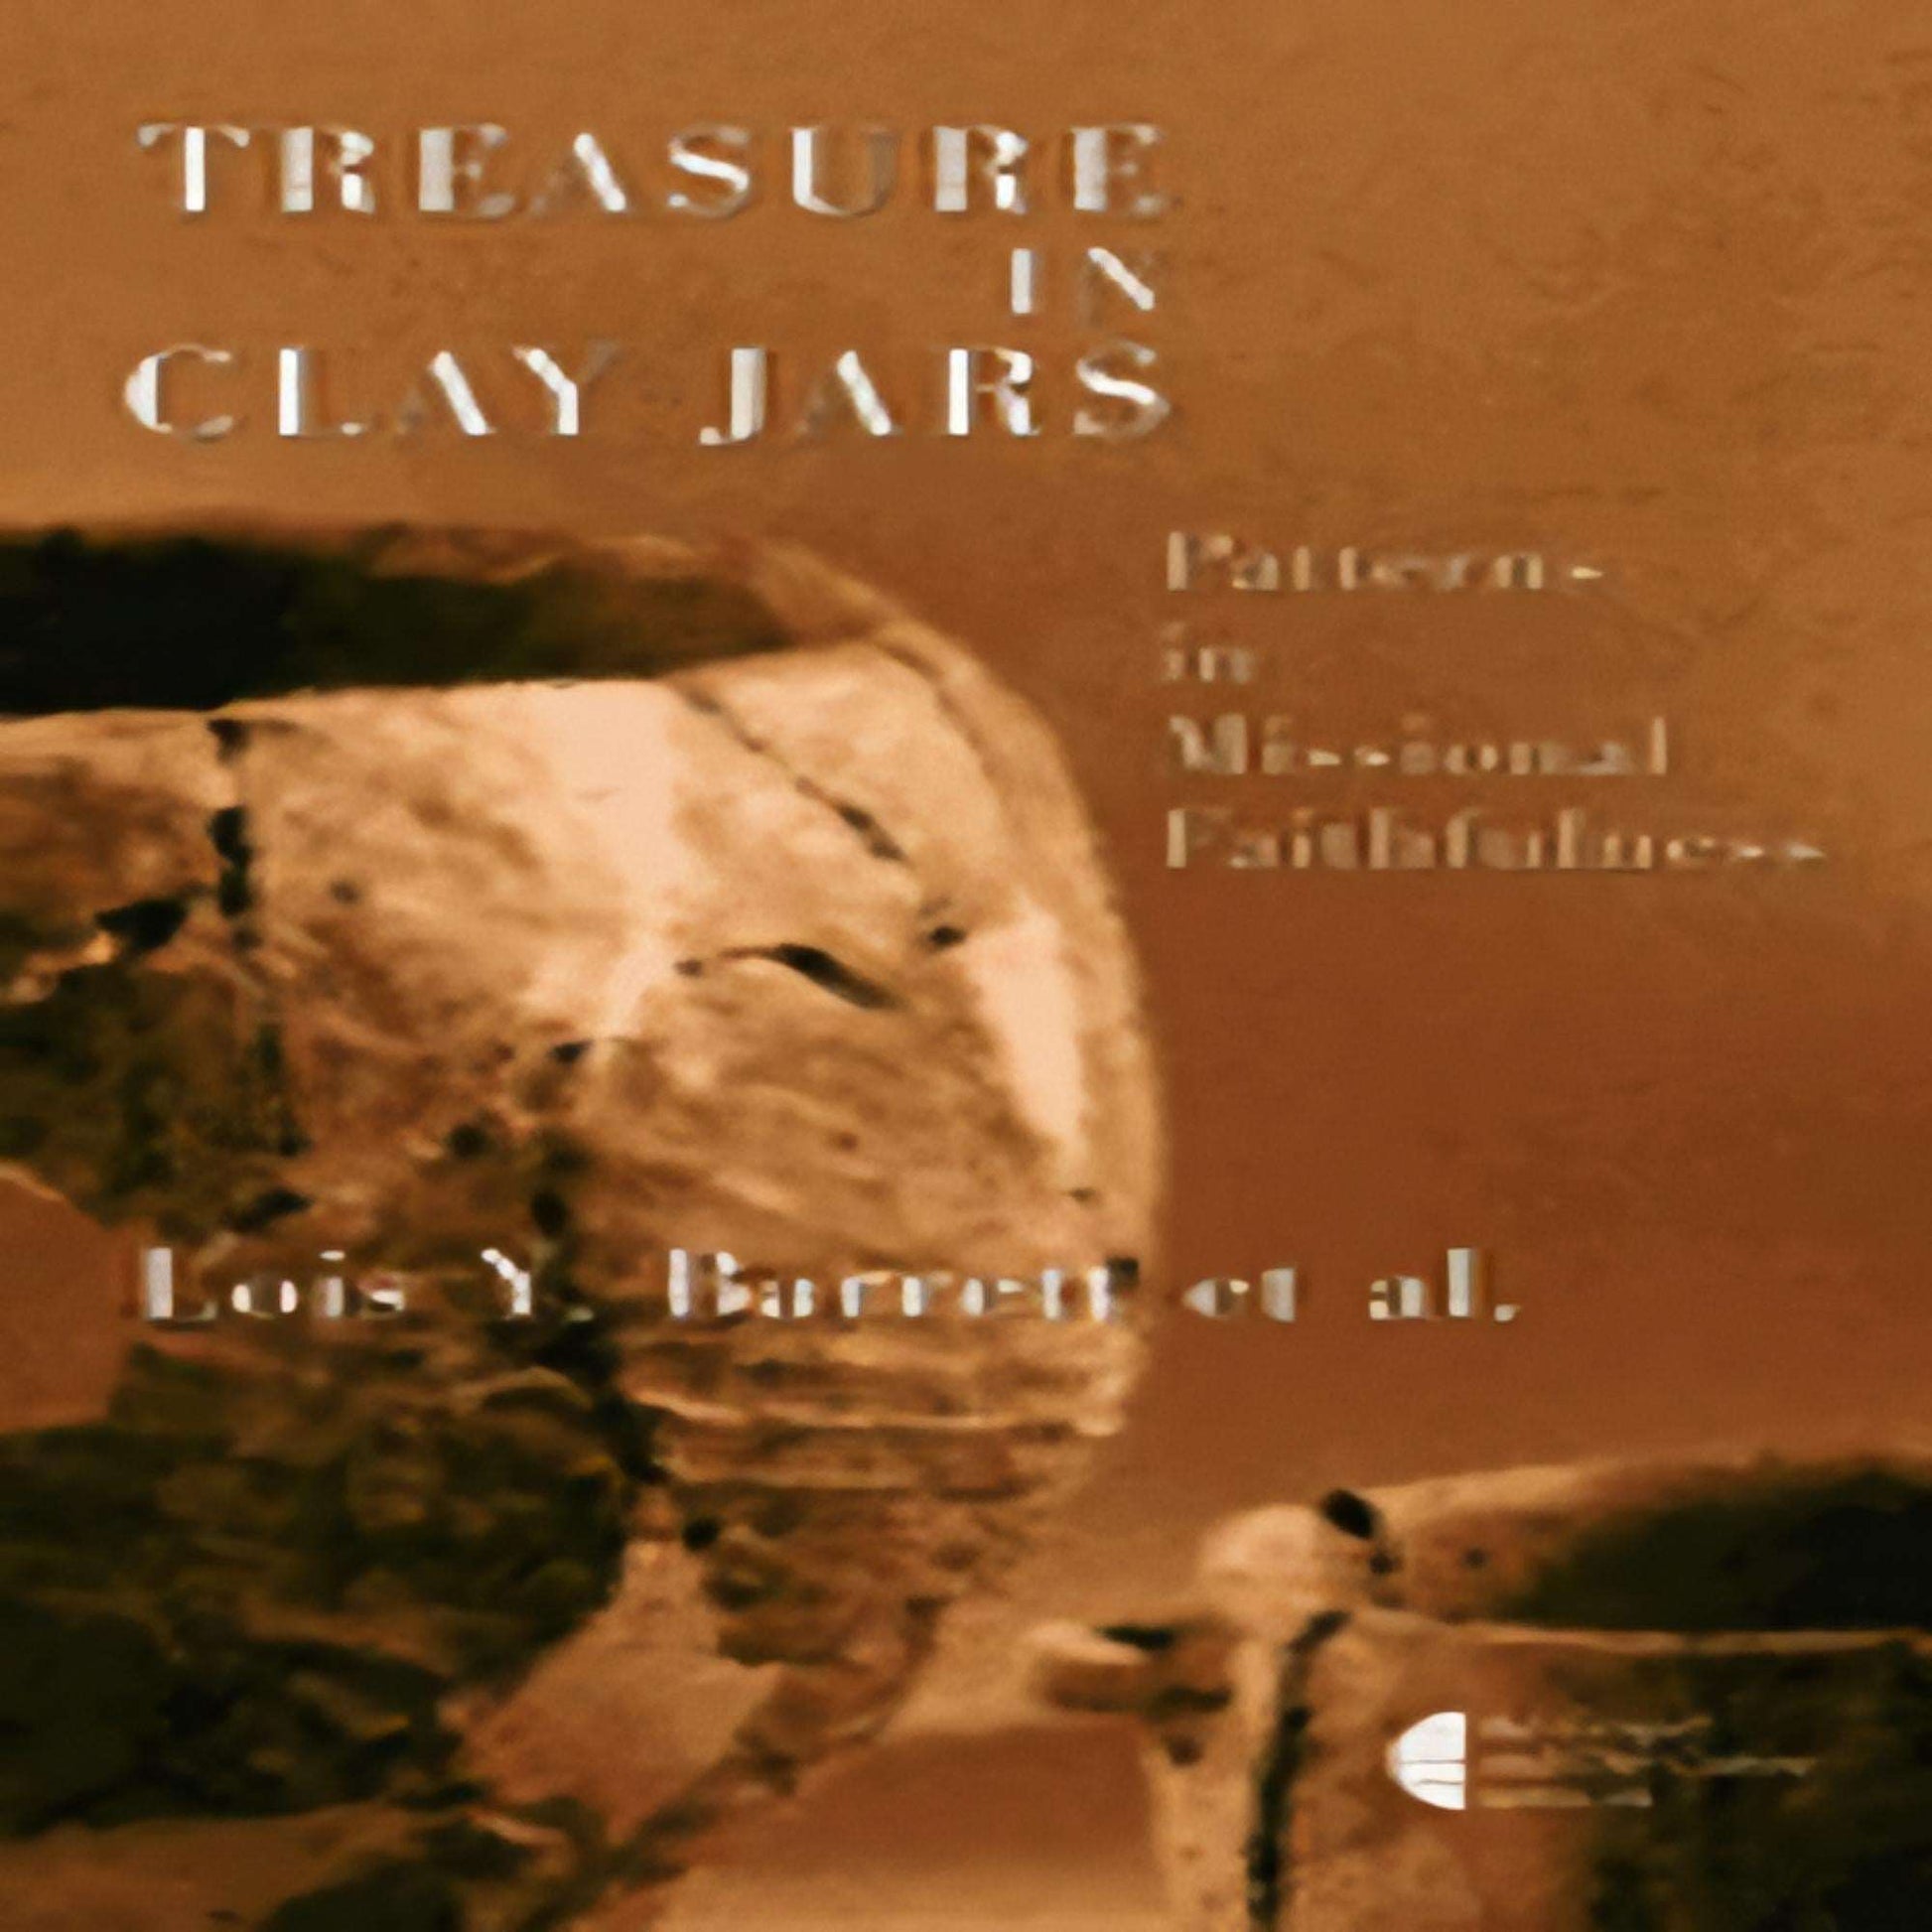 Treasure in Clay Jars: Patterns in Missional Faithfulness (Gospel and Our Culture Series (Gocs))74-021423-080282692XDPGBOOKSTORE.COM. Today's Bestsellers.